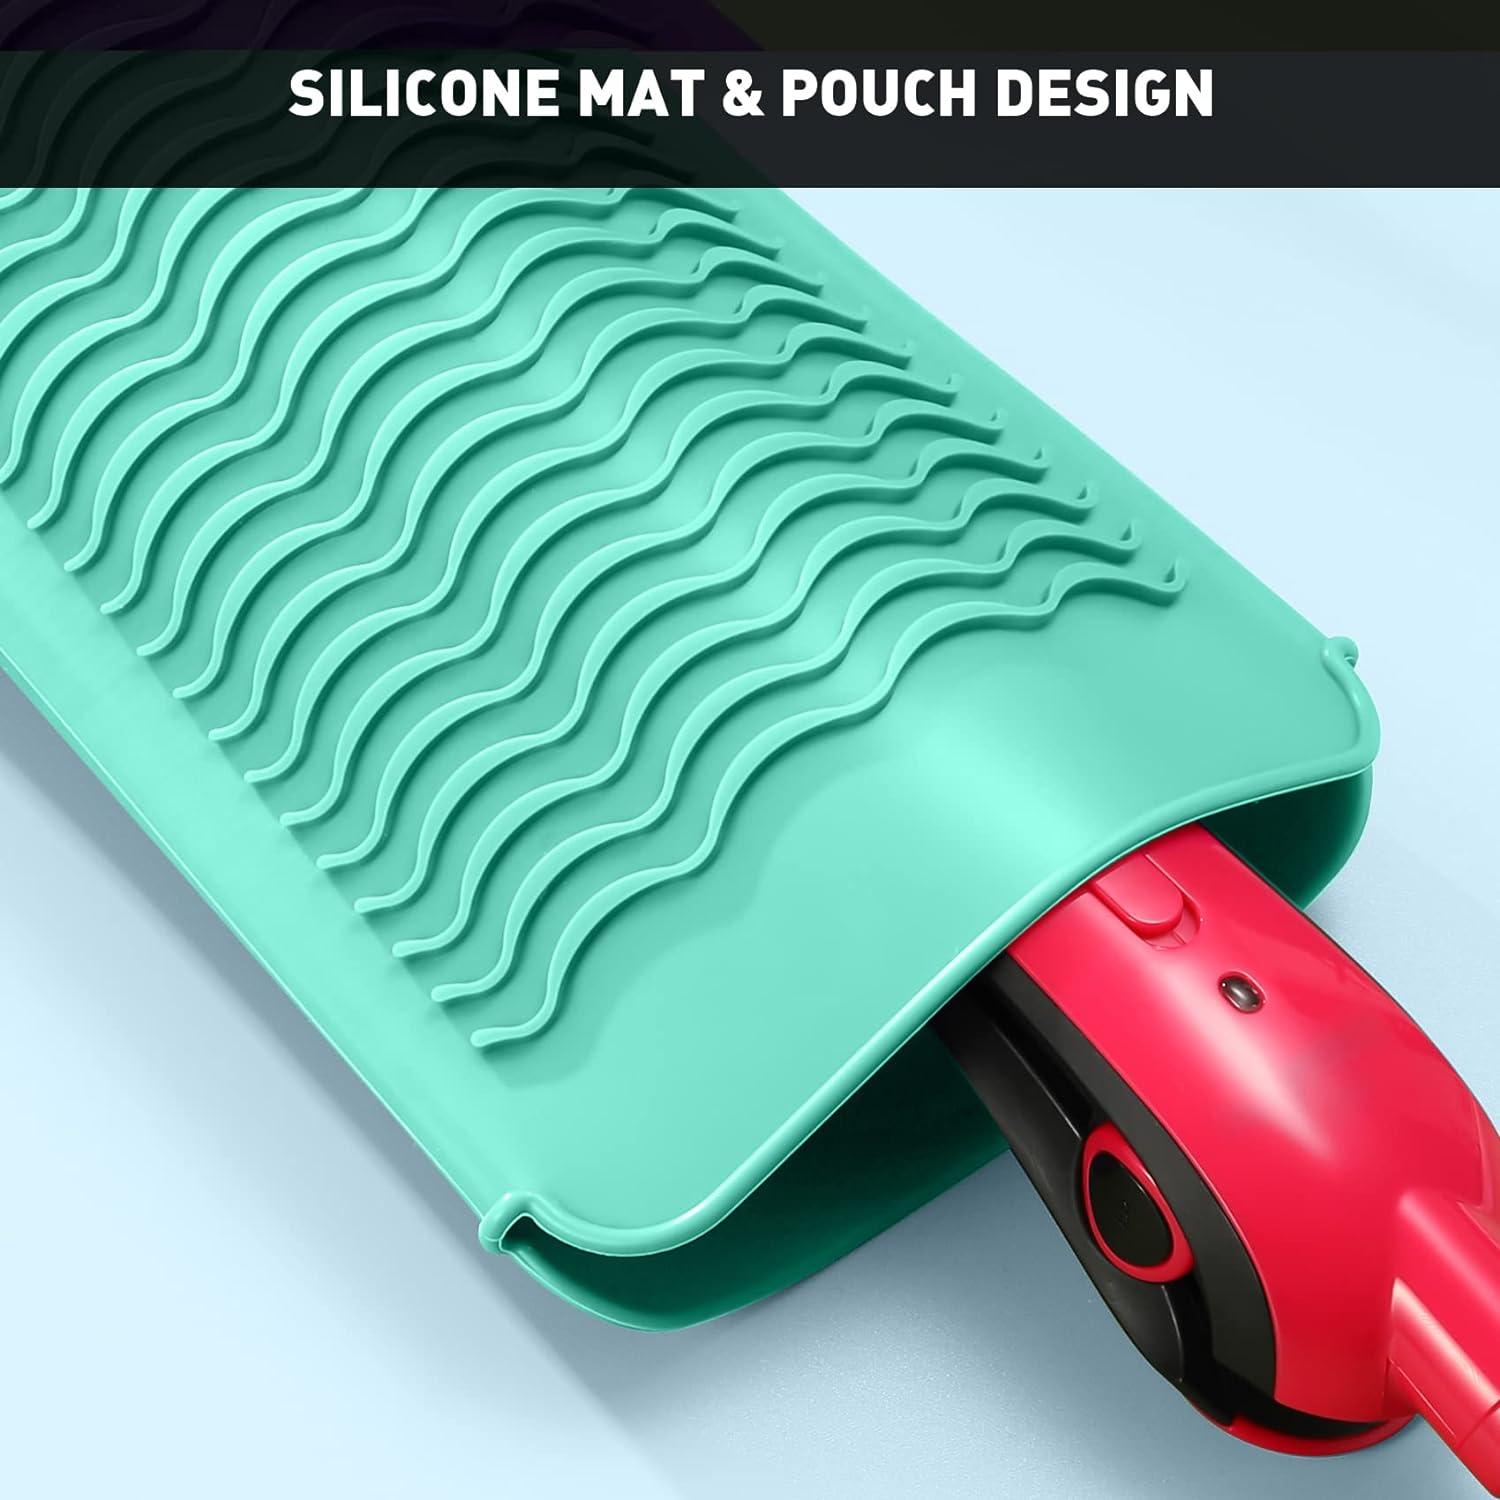 Heat Resistant Silicone Mat Pouch for Flat Iron, Curling Iron,Hair